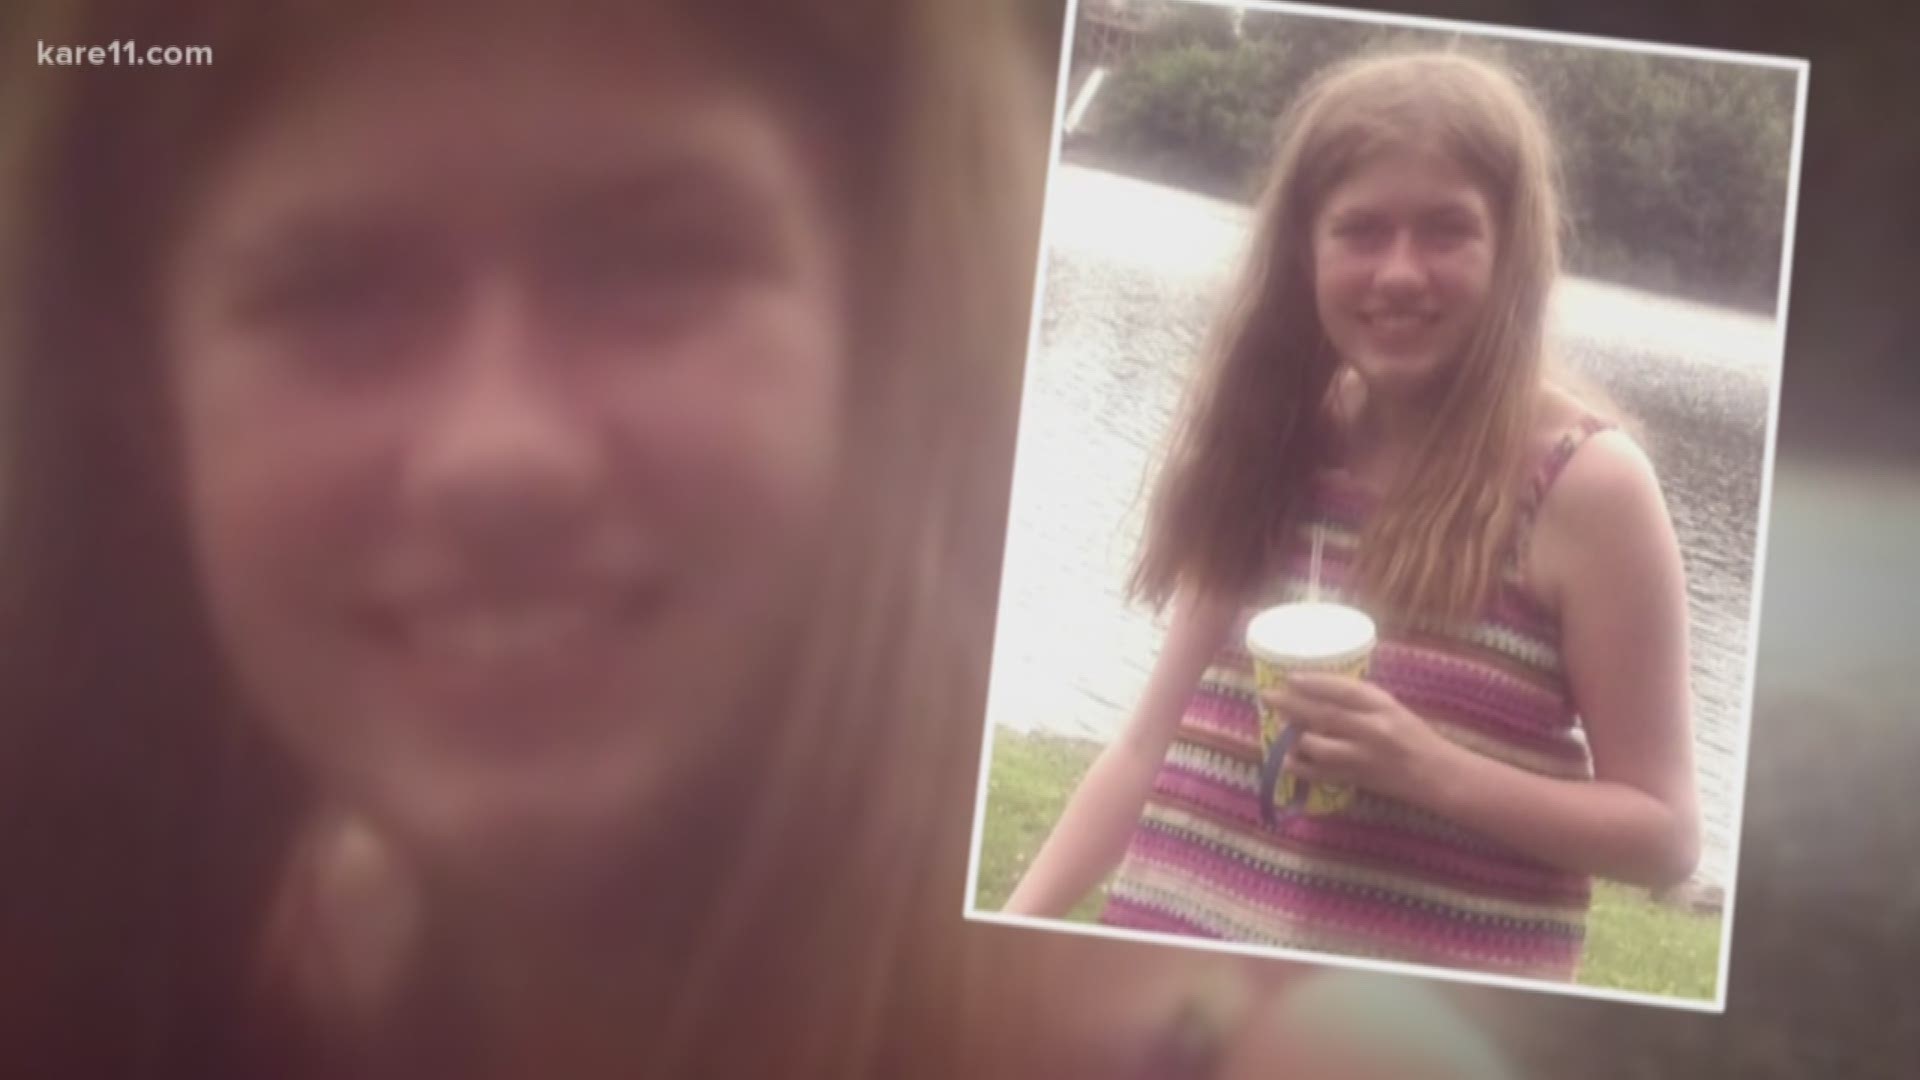 Nearly a week into the search for missing 13-year-old Jayme Closs, the Barron County Sheriff's Department has received more than 1,200 tips and says it has "thoroughly investigated over 1,000." https://kare11.tv/2yVsxhC